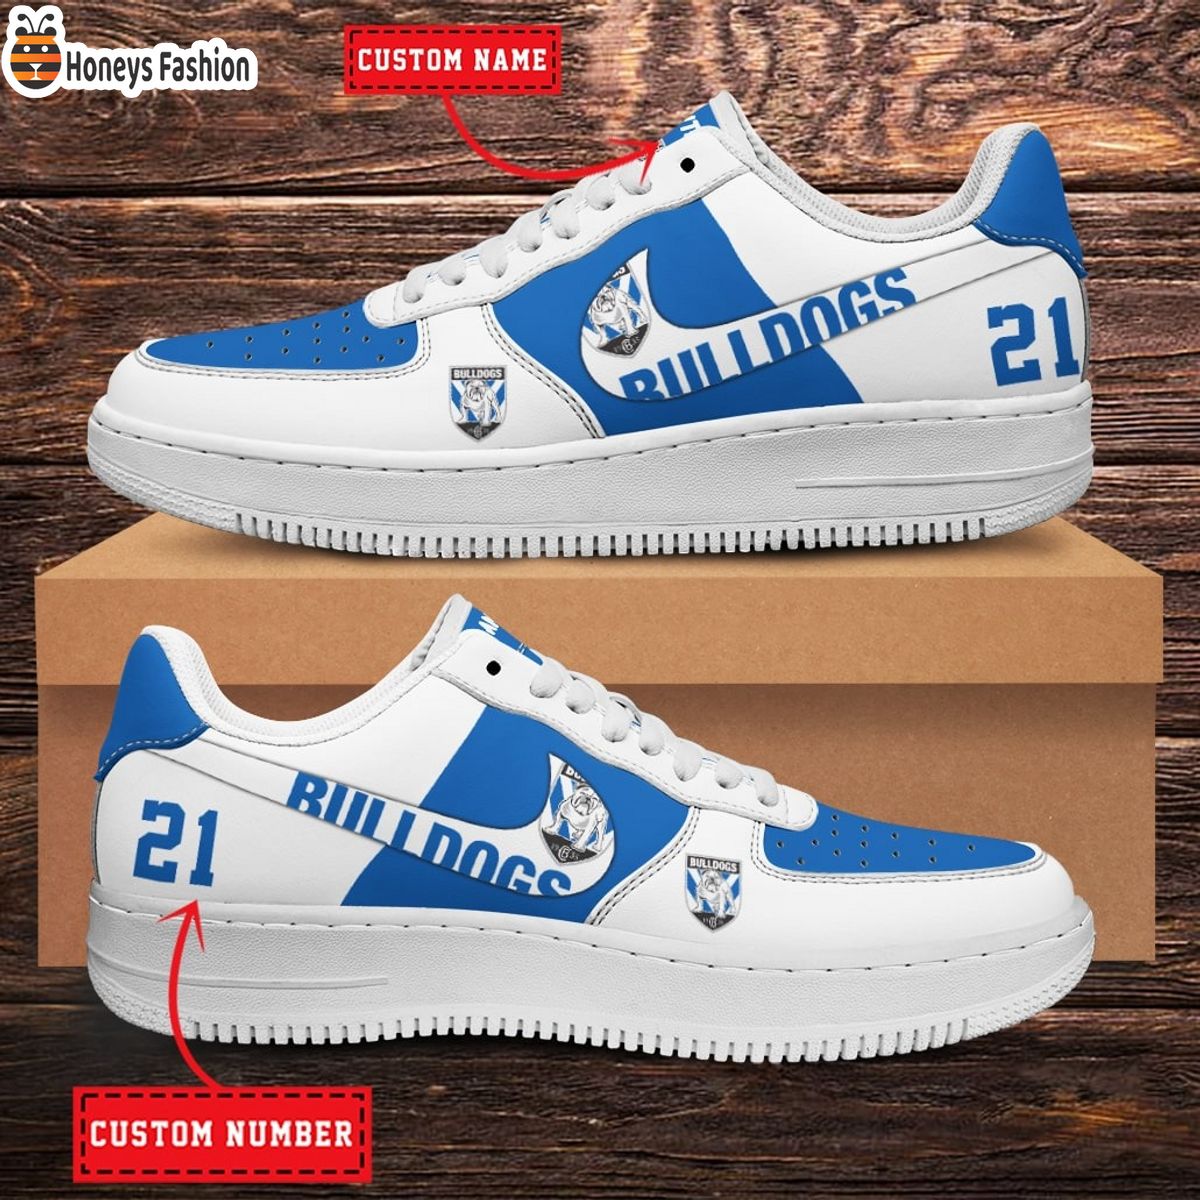 Canterbury-Bankstown Bulldogs NRL Personalized Air Force 1 Shoes